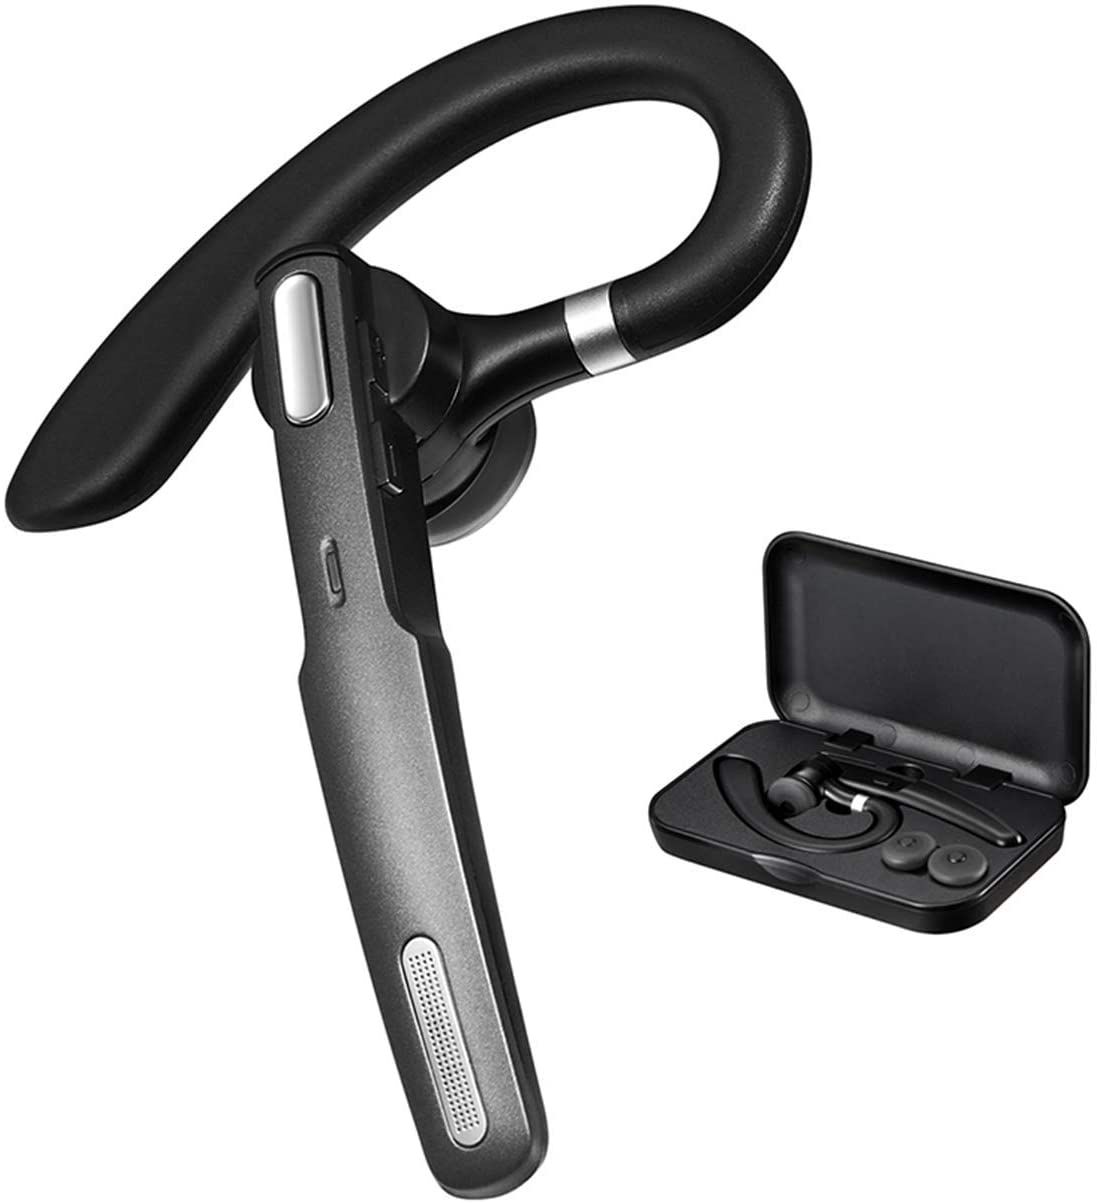 (FREE DELIVERY) NEW bluetooth wireless earpiece headset w/ microphone (compatible with iPhone and Android)